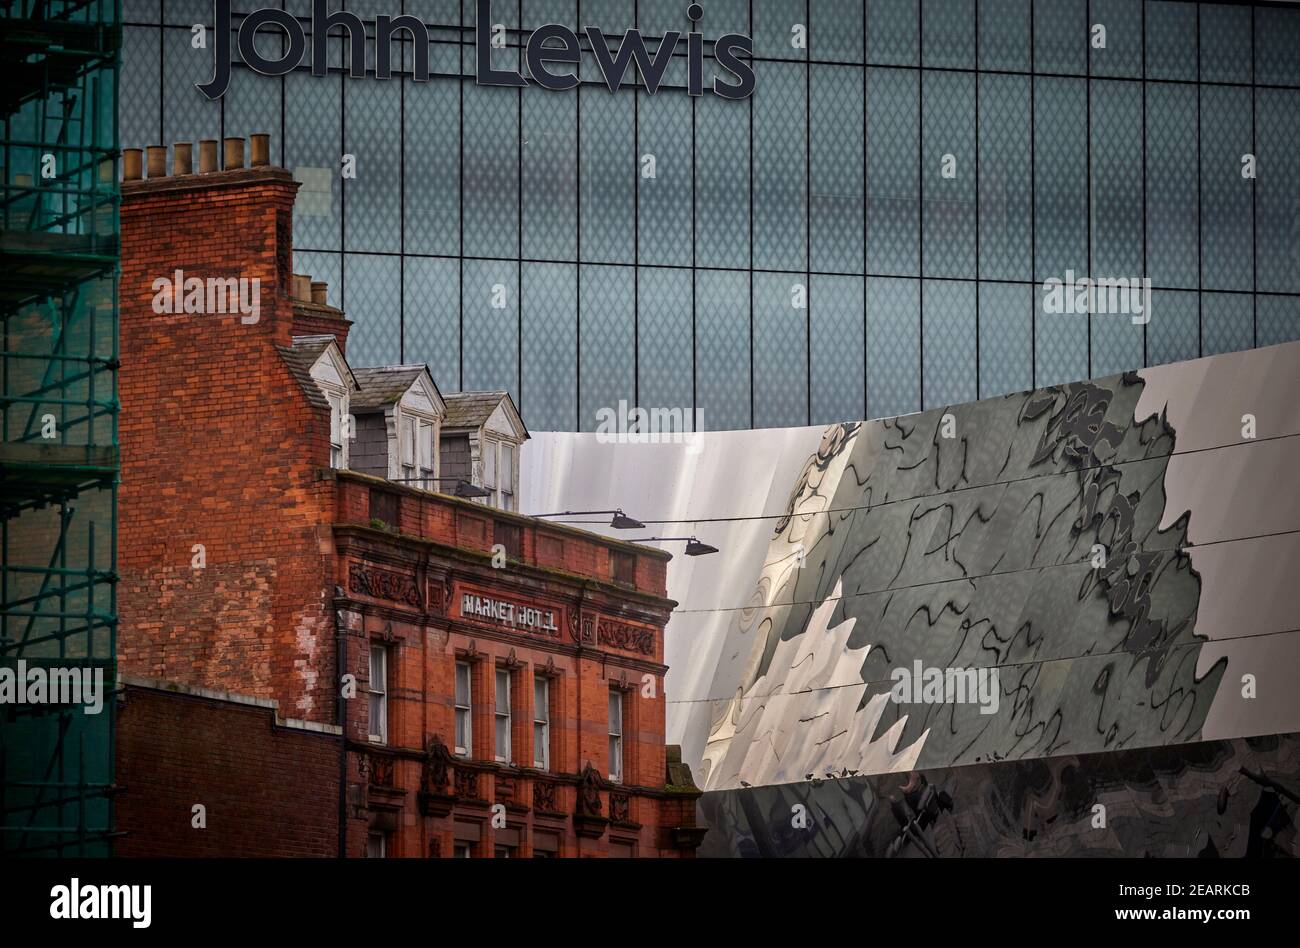 Birmingham John Lewis store and the facia of Market Hotel a purpose built Victorian hotels Stock Photo